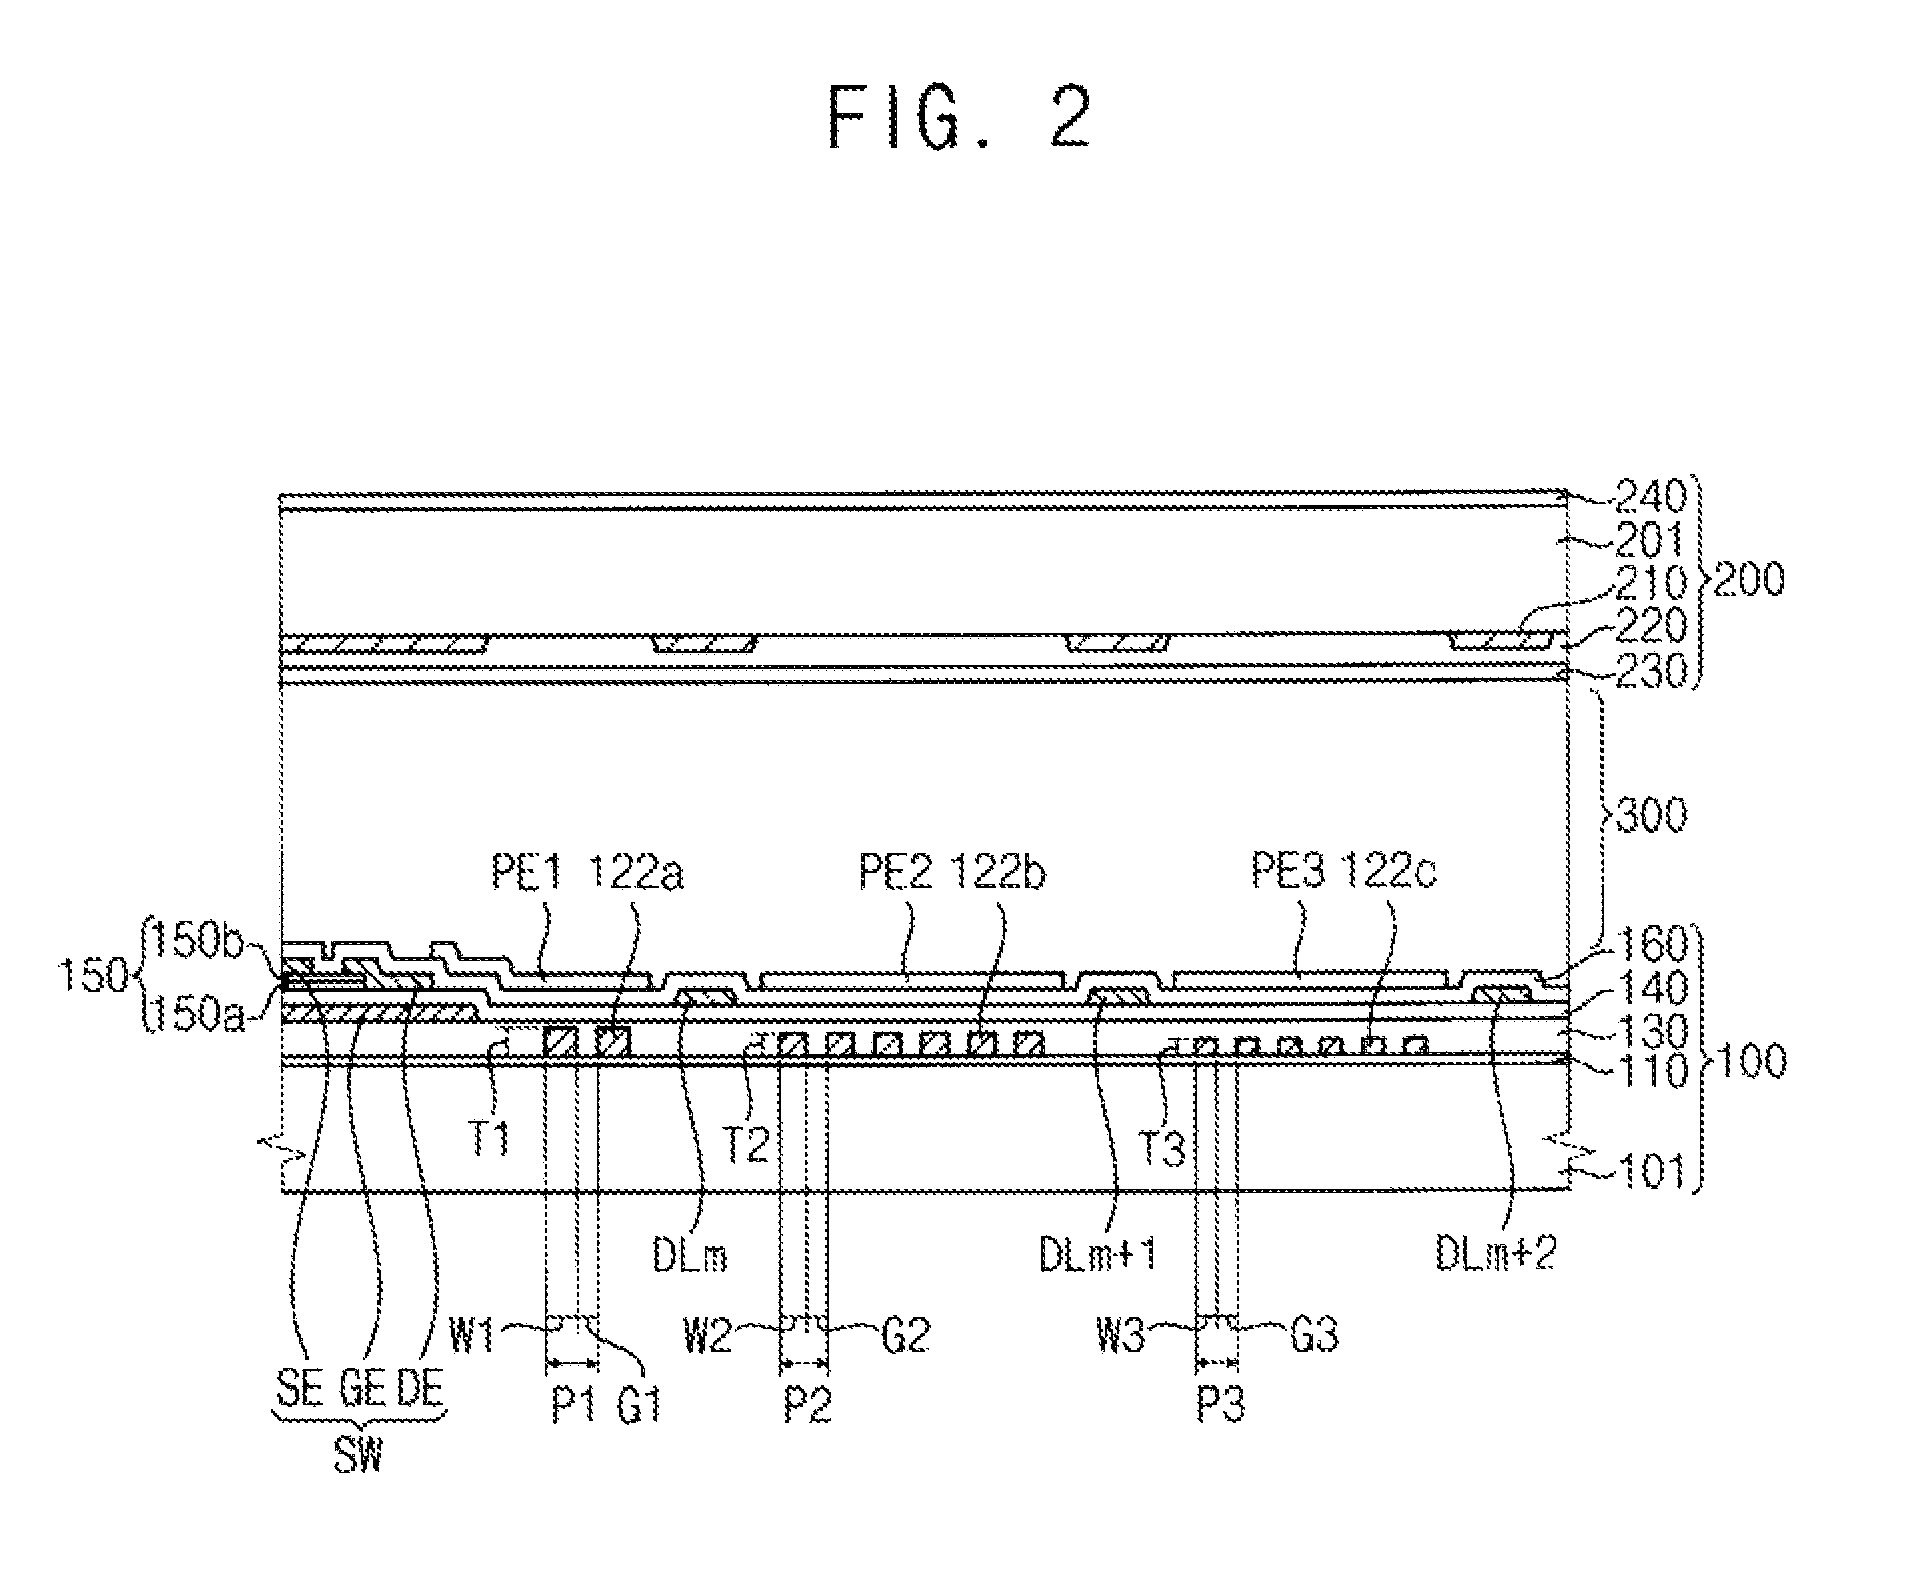 Display substrate, method of manufacturing the display substrate, and display device having the display substrate